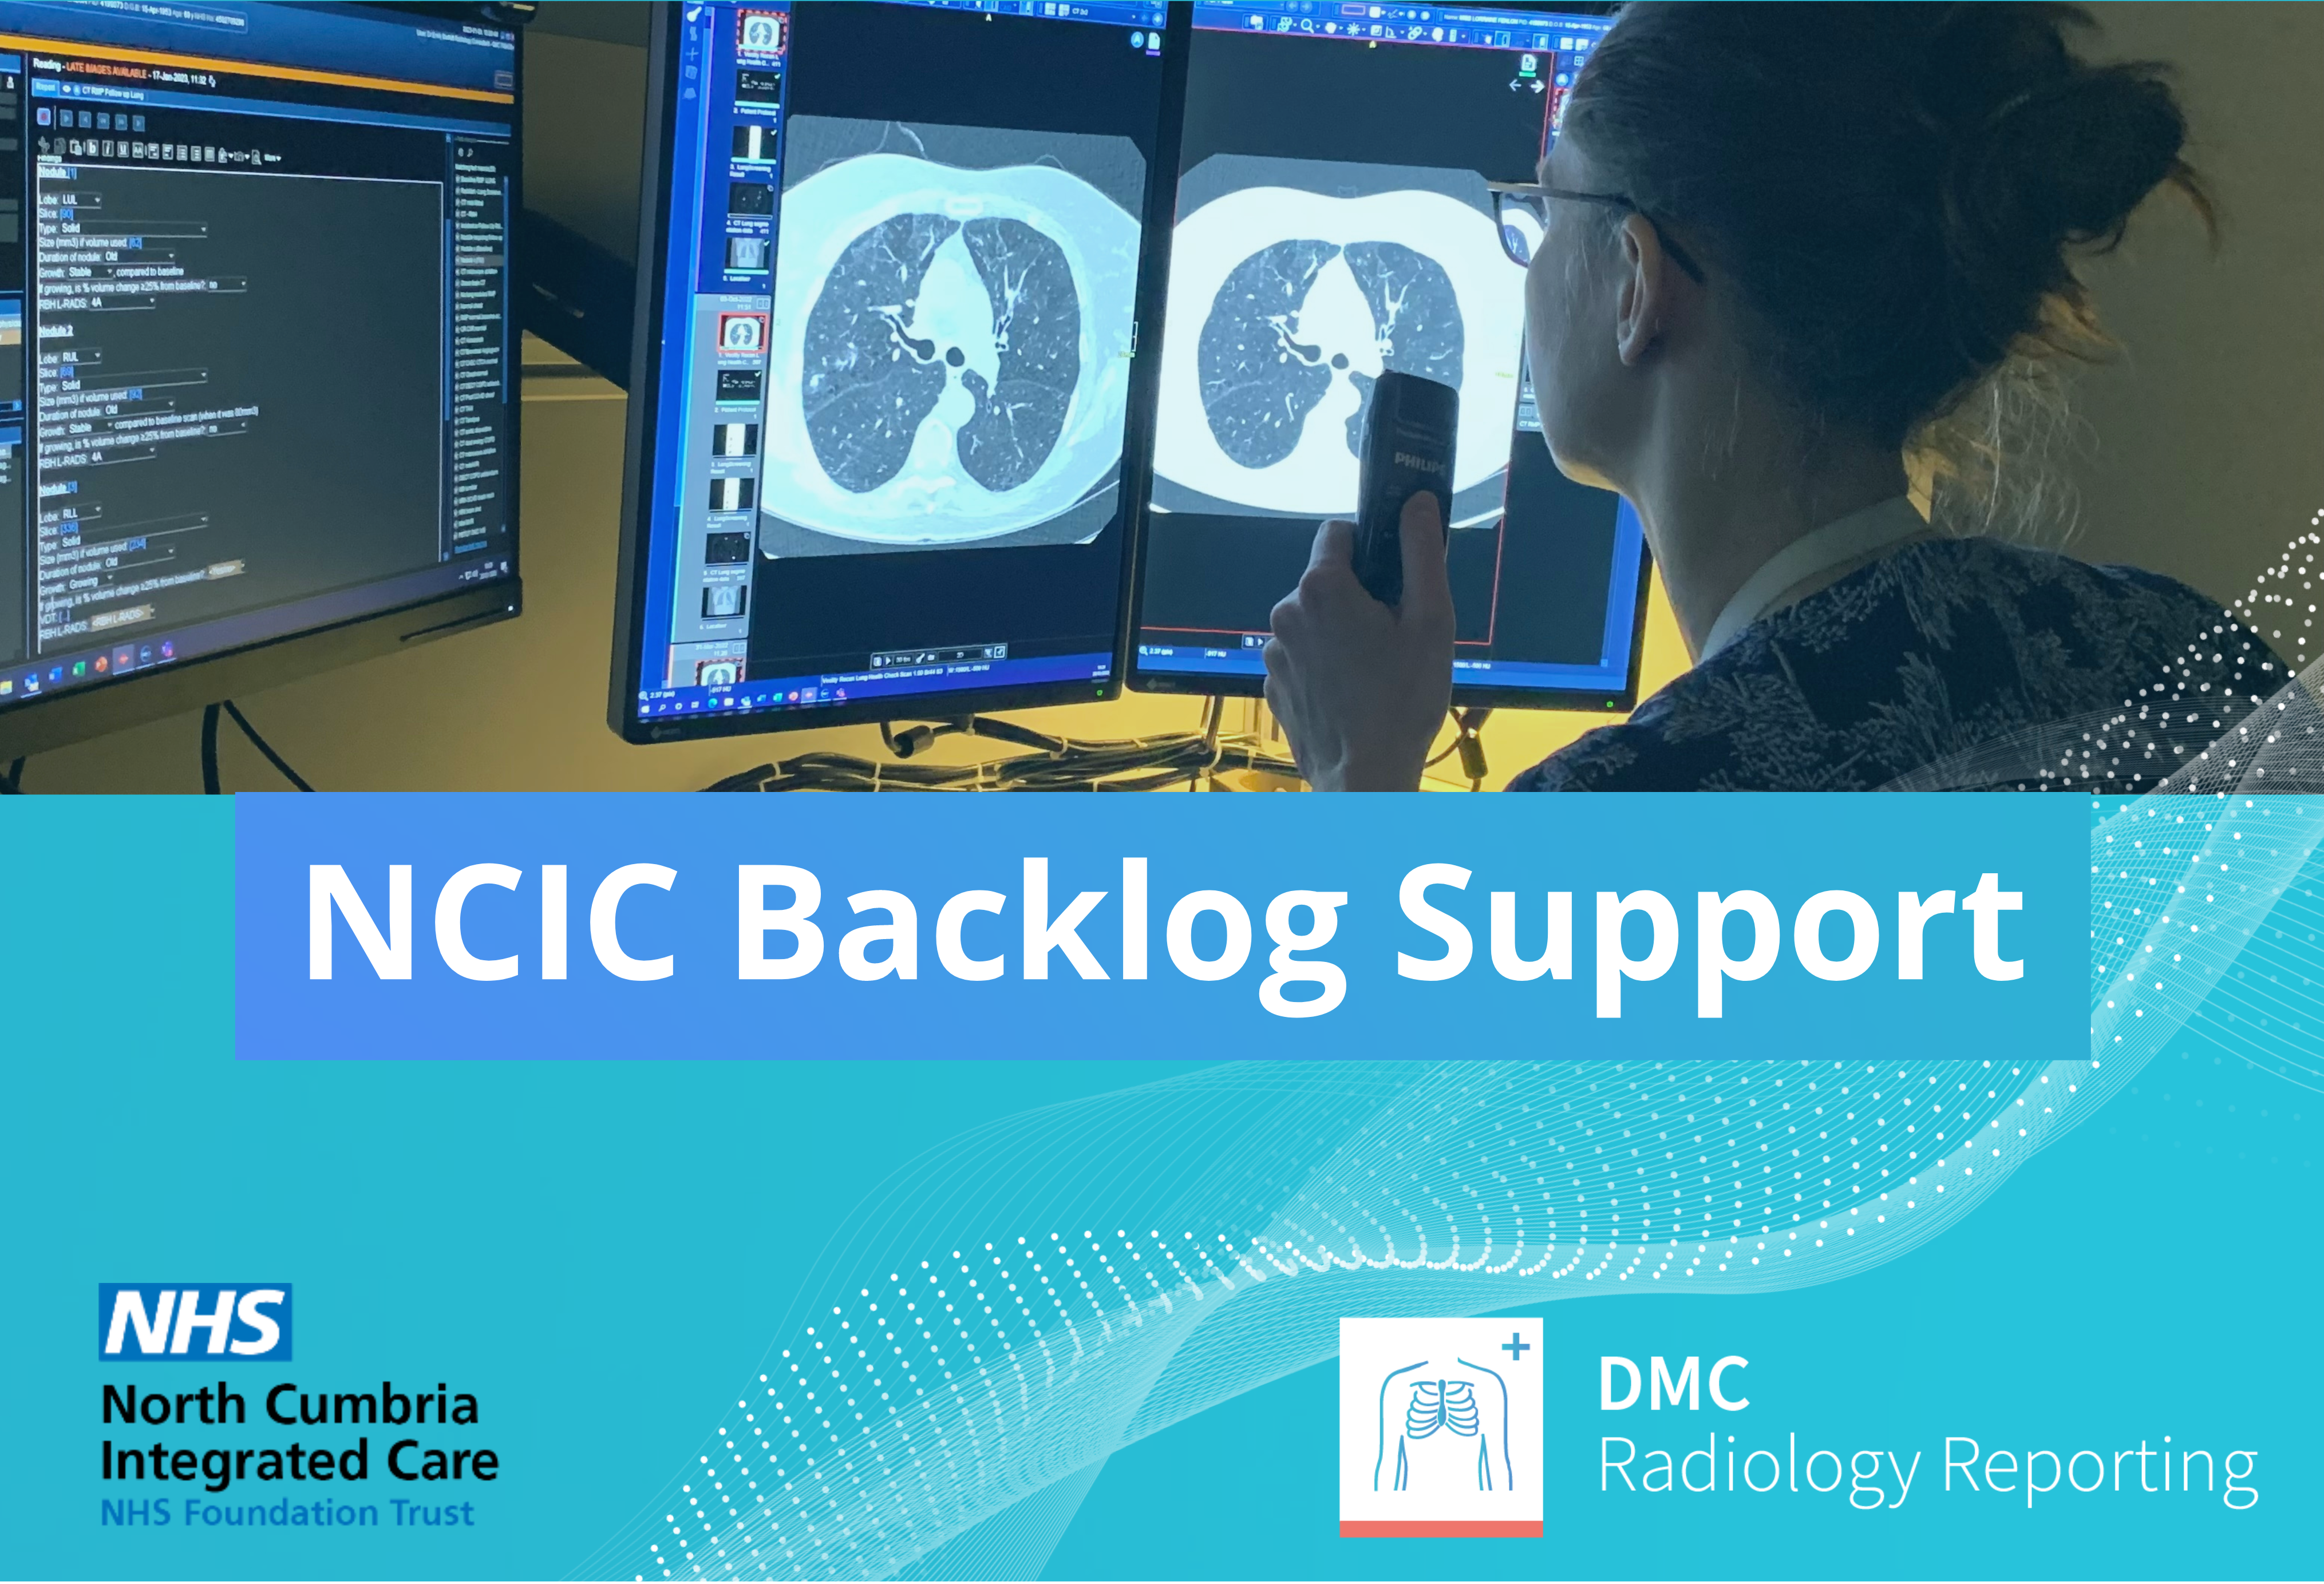 DMC Healthcare, a leading independent provider of radiology reporting, primary care, dermatology and endoscopy services, has been supporting North Cumbria Integrated Care NHS Foundation Trust to tackle backlogs in radiology reporting services. The reporting backlog of CT/MRI cases grew to a peak of 2800 but is now down to 600.